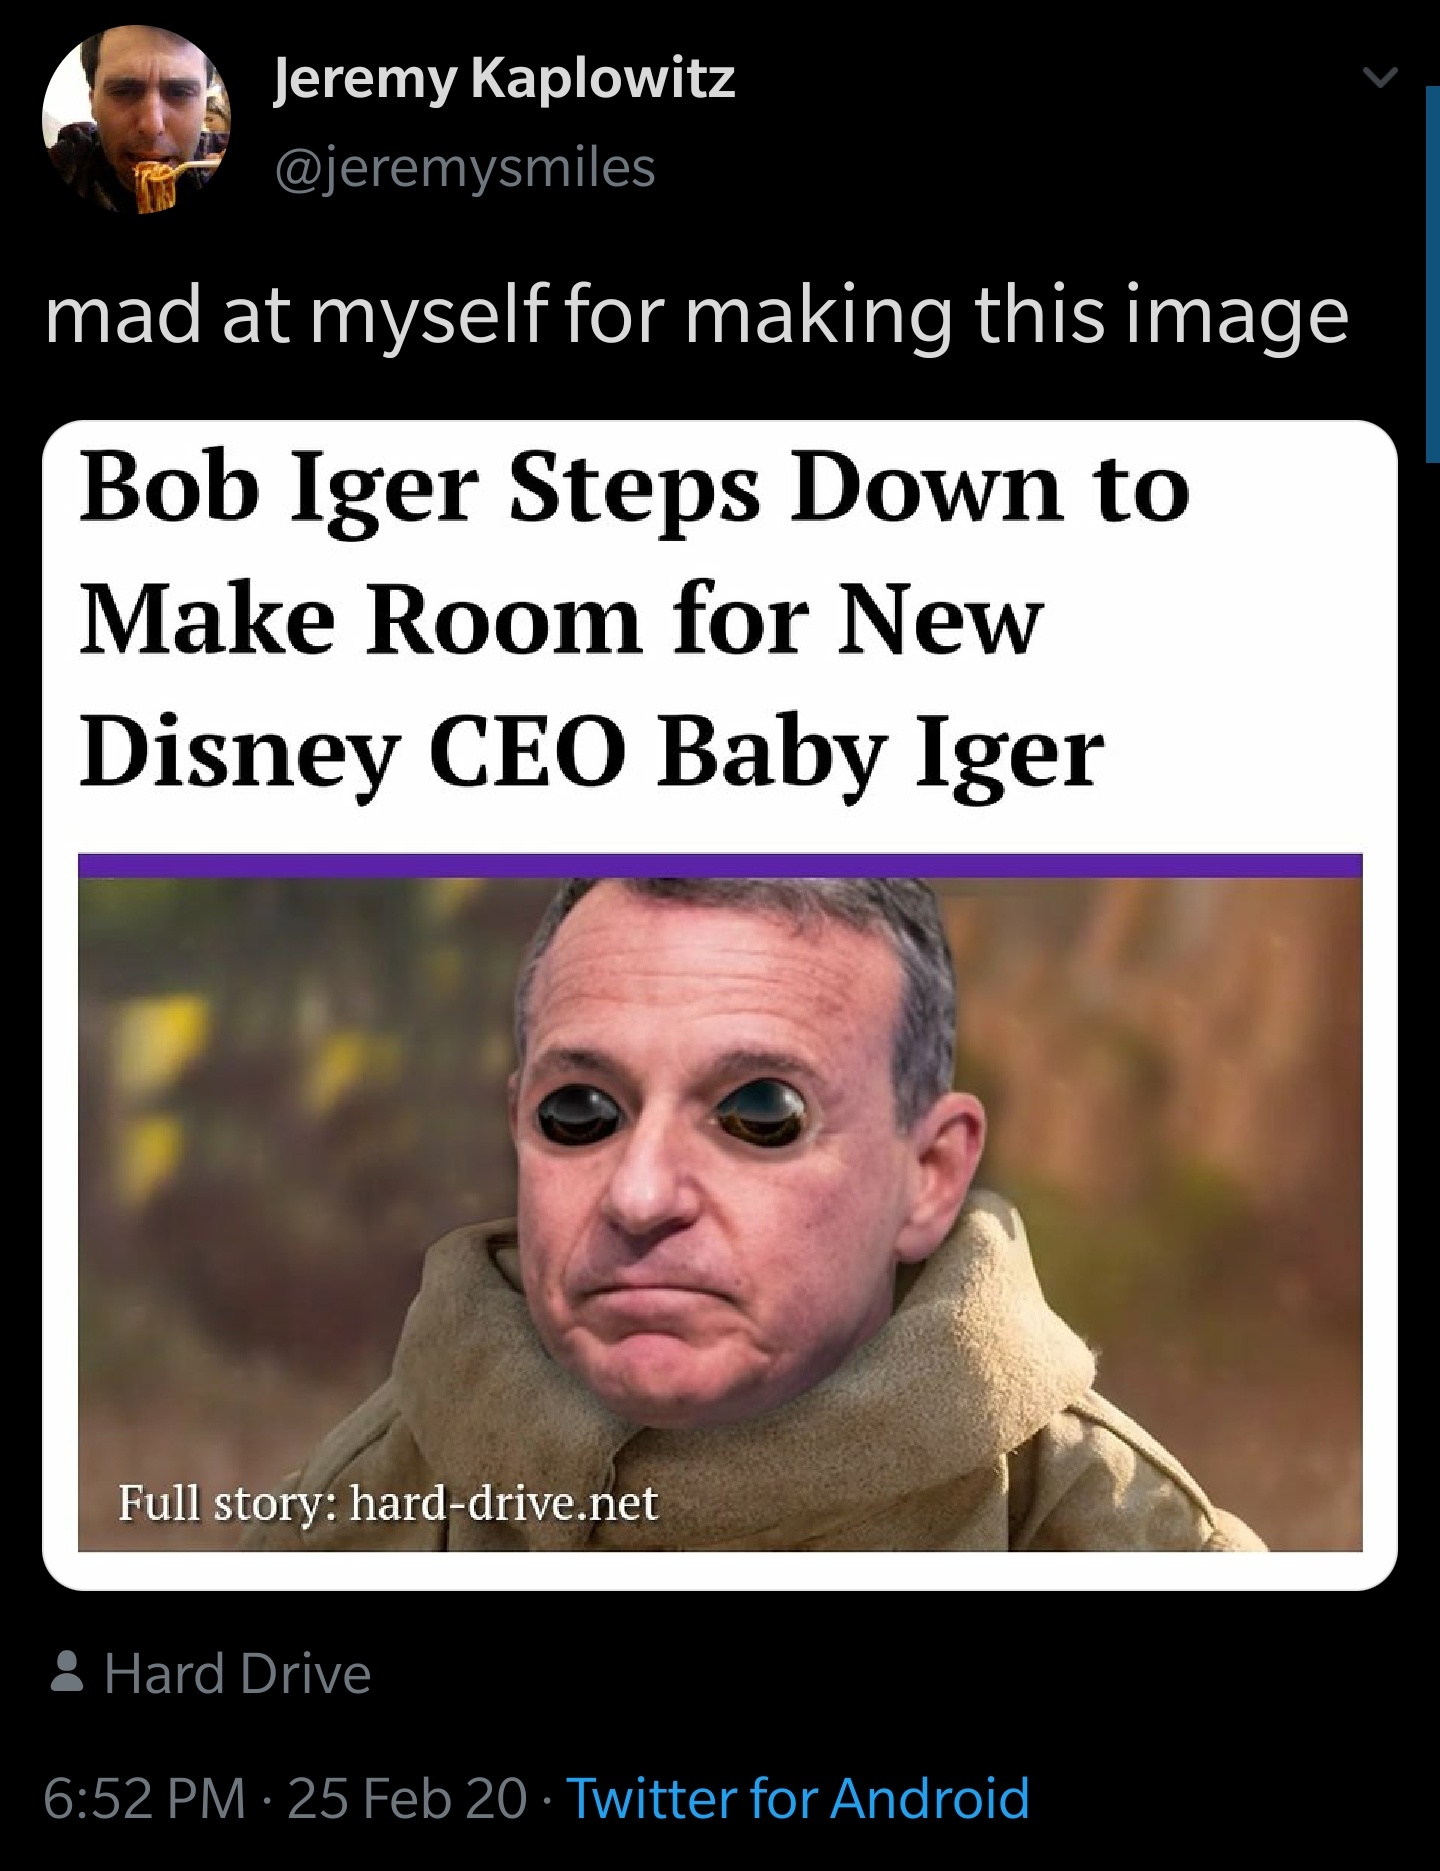 bk property management - Jeremy Kaplowitz 'mad at myself for making this image Bob Iger Steps Down to Make Room for New Disney Ceo Baby Iger Full story harddrive.net Hard Drive 25 Feb 20 Twitter for Android